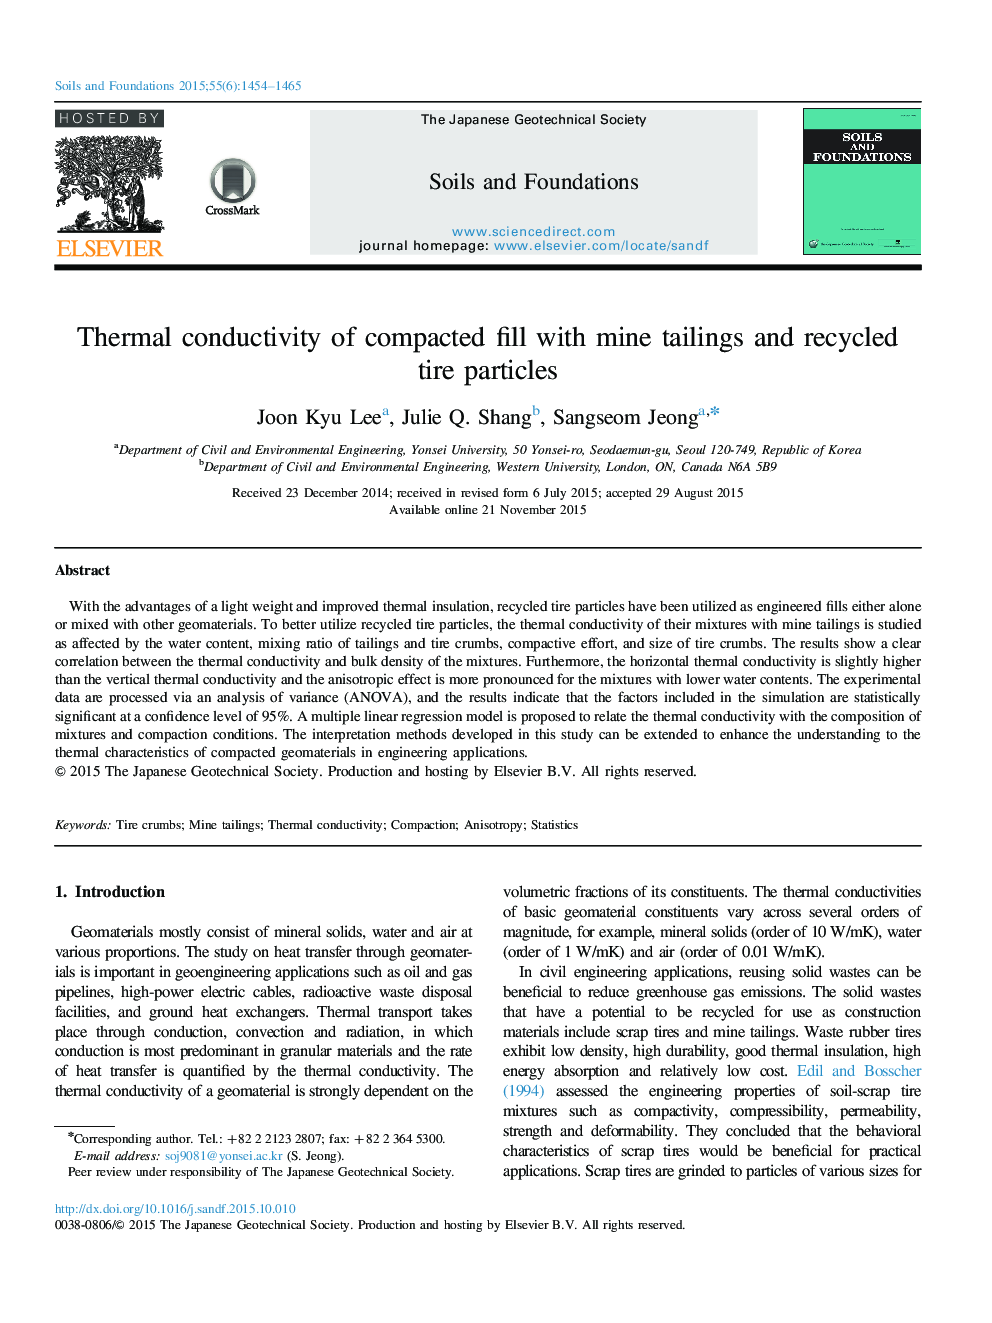 Thermal conductivity of compacted fill with mine tailings and recycled tire particles